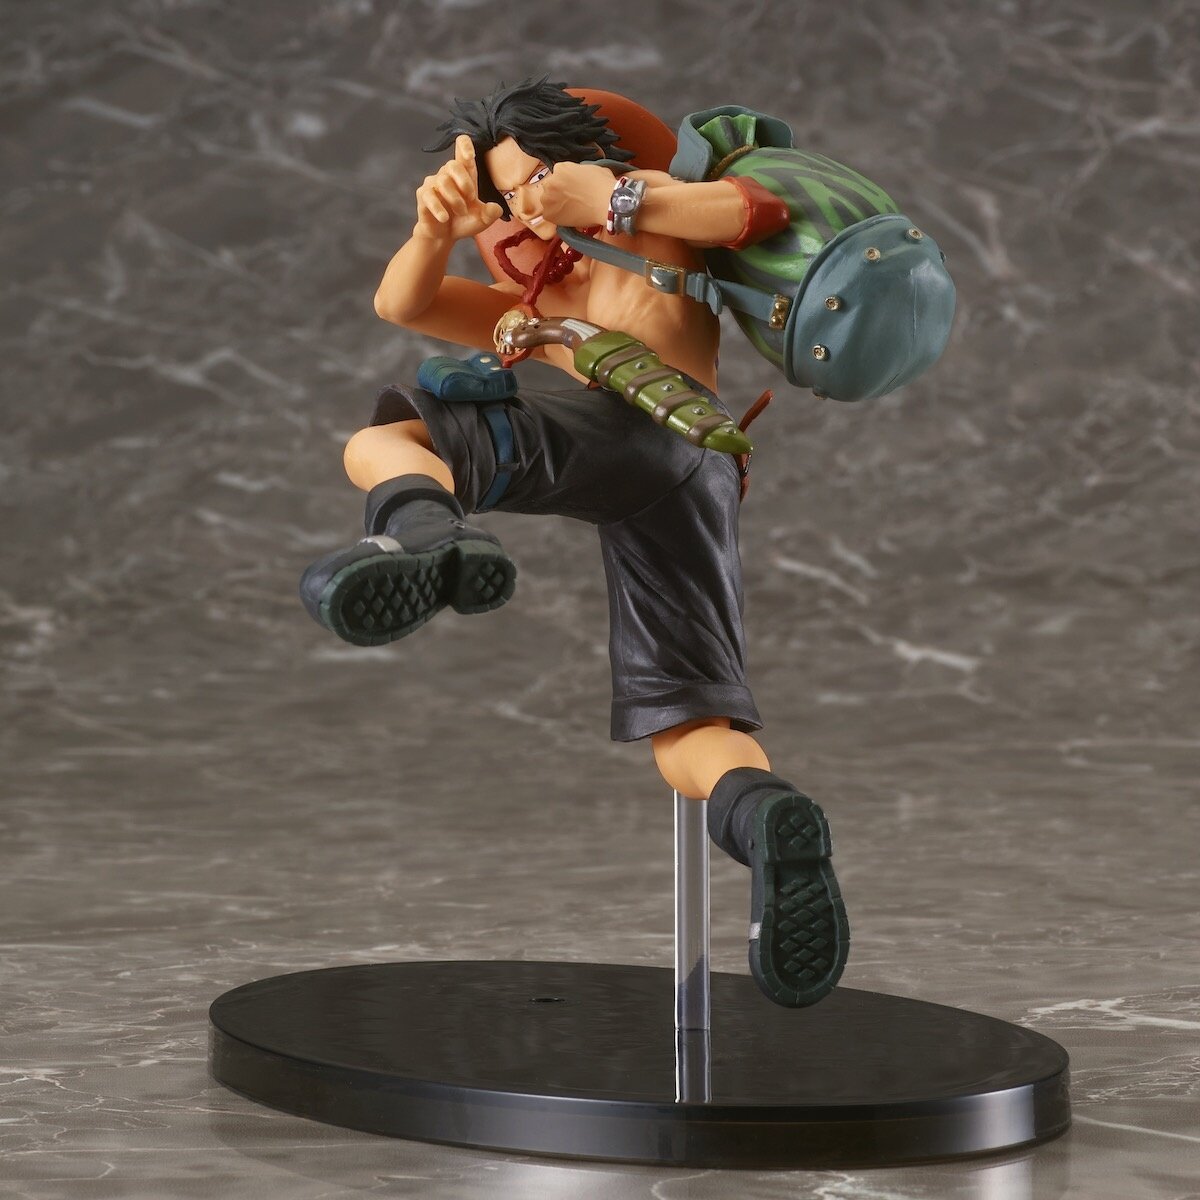 One Piece Ace - Luffy - Zoro Action Figure Collection 7